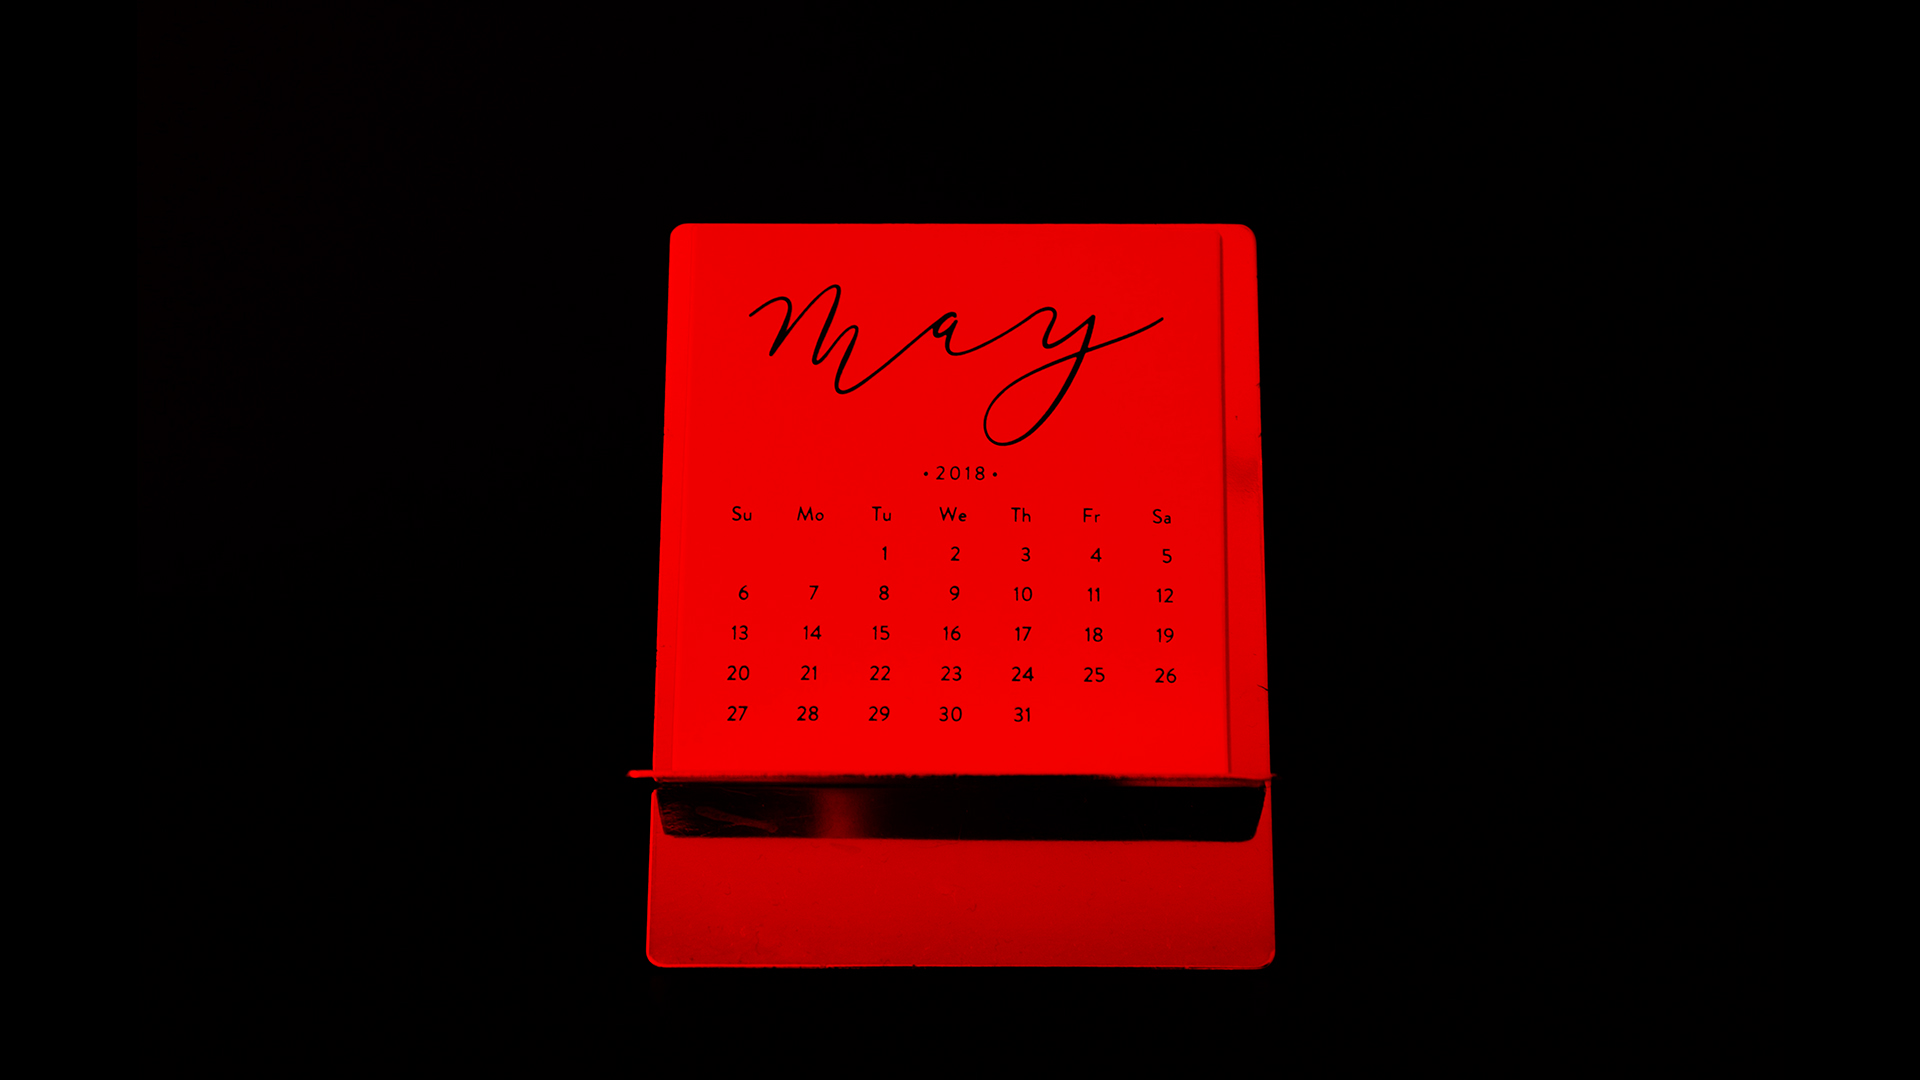 Trading Justice Newsletter, May 2019: Sell in May and Go Away? (Photo by Charles on Unsplash modified by Christian Sisson)